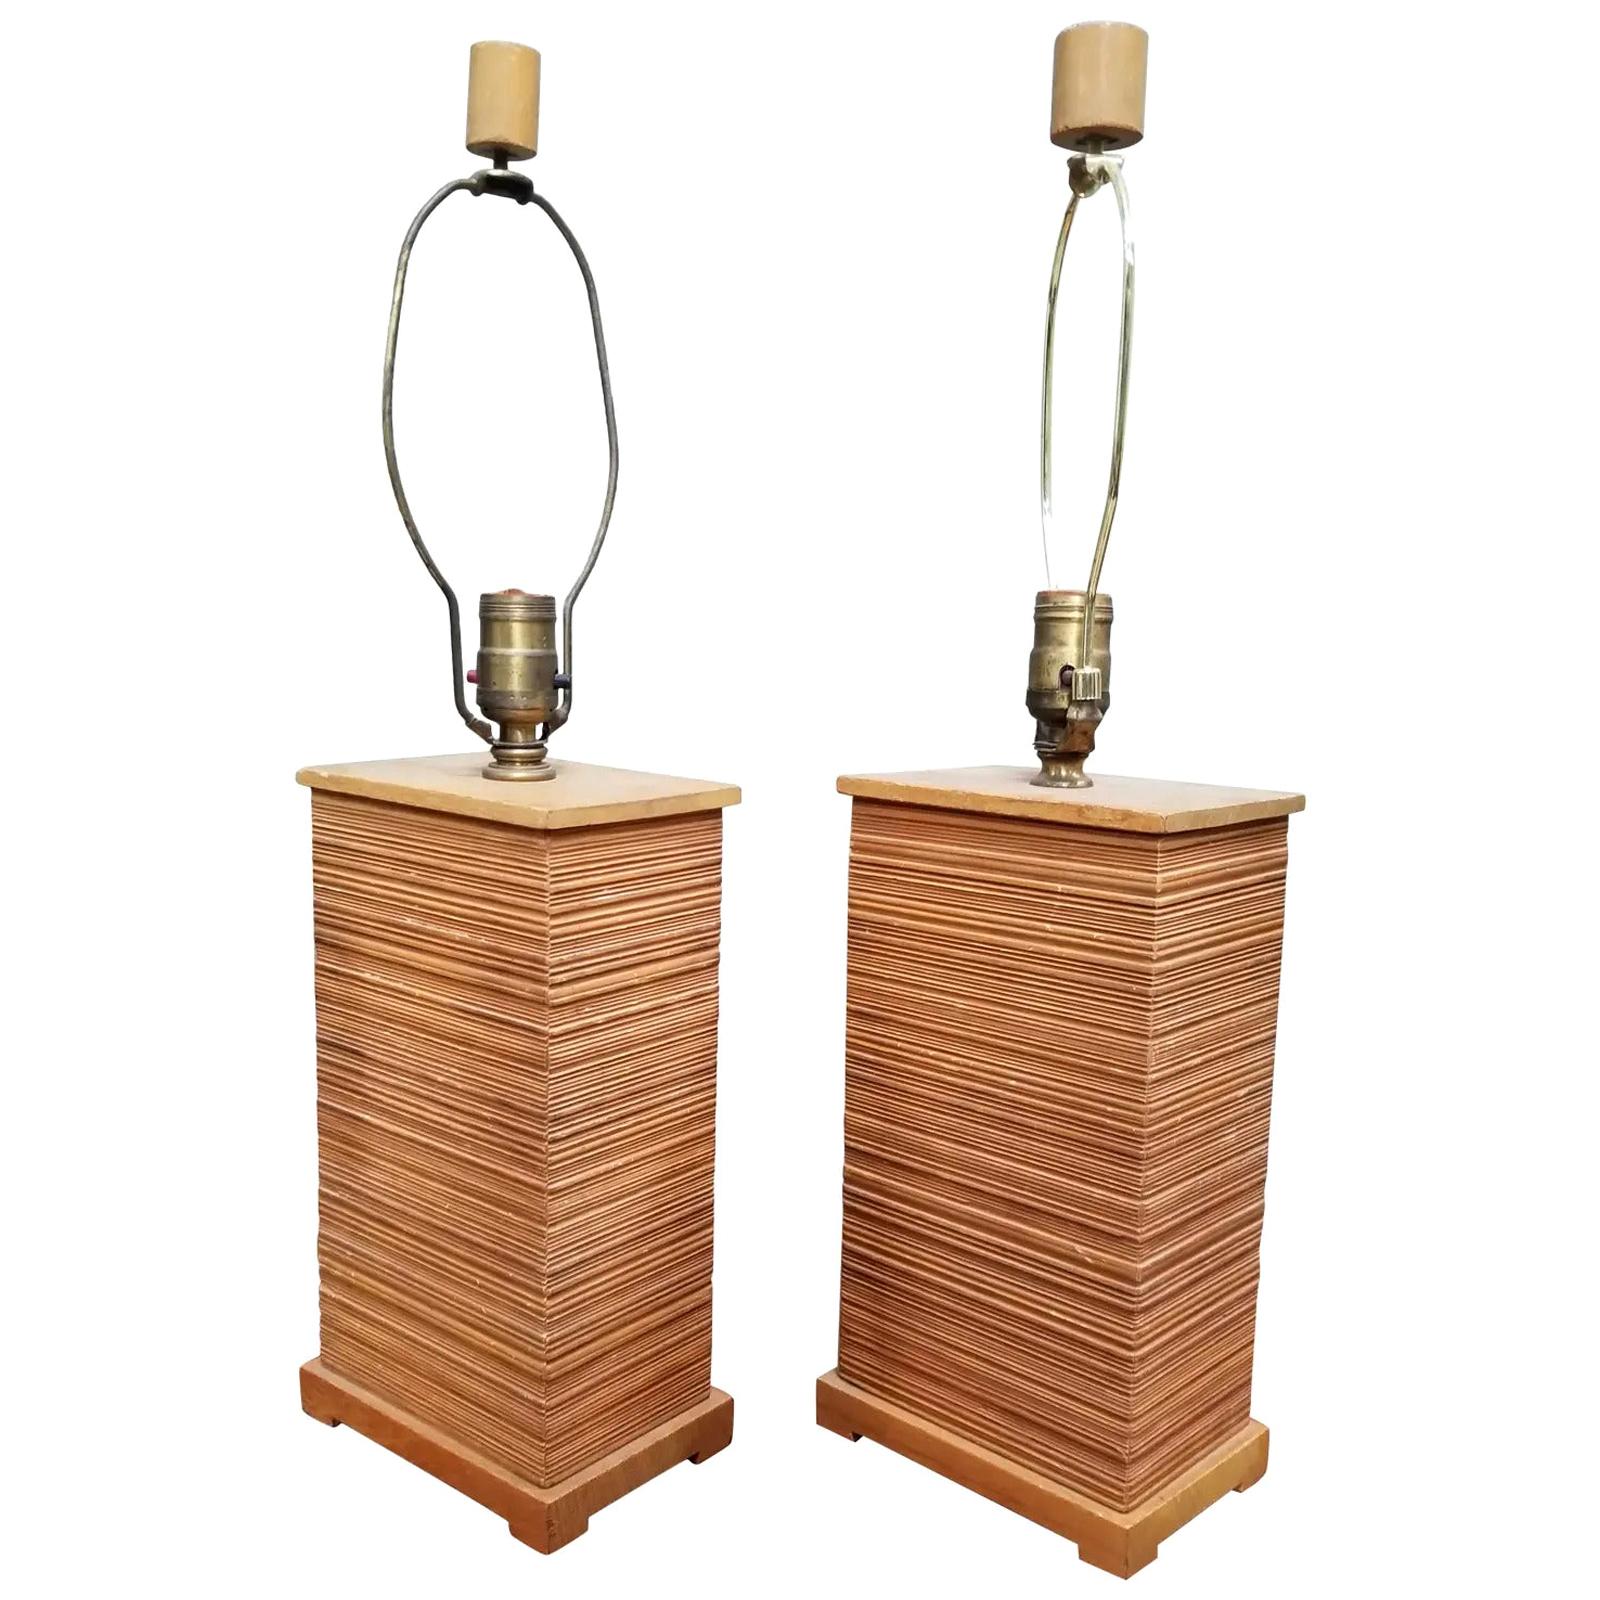 Paul Frankl Combed Fir Table Lamps, a Pair For Sale